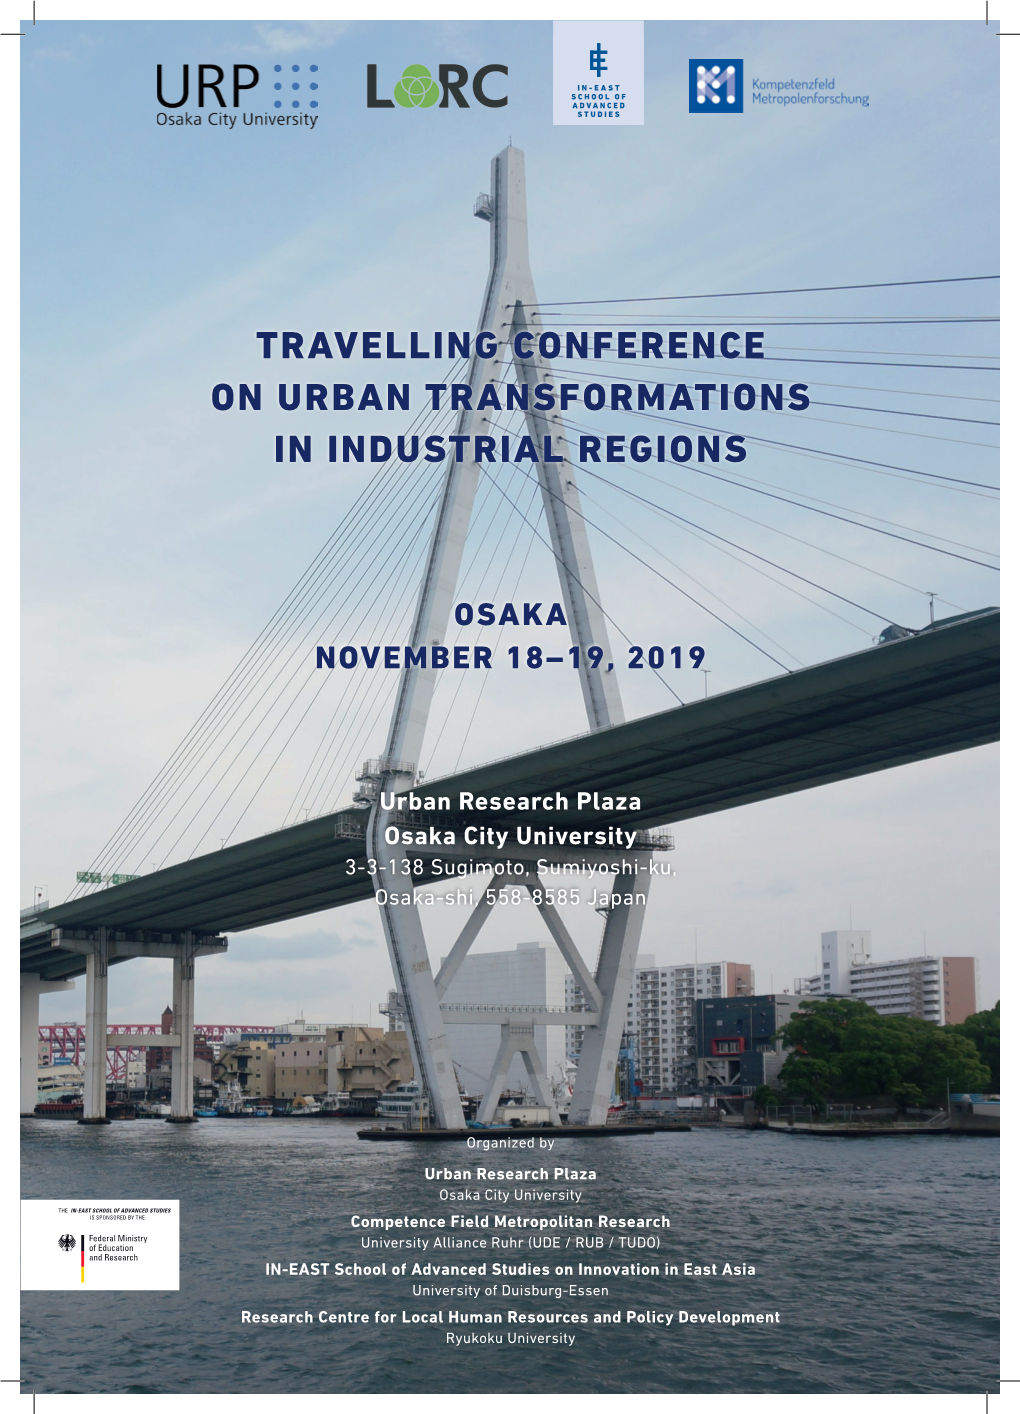 Travelling Conference on Urban Transformations in Industrial Regions